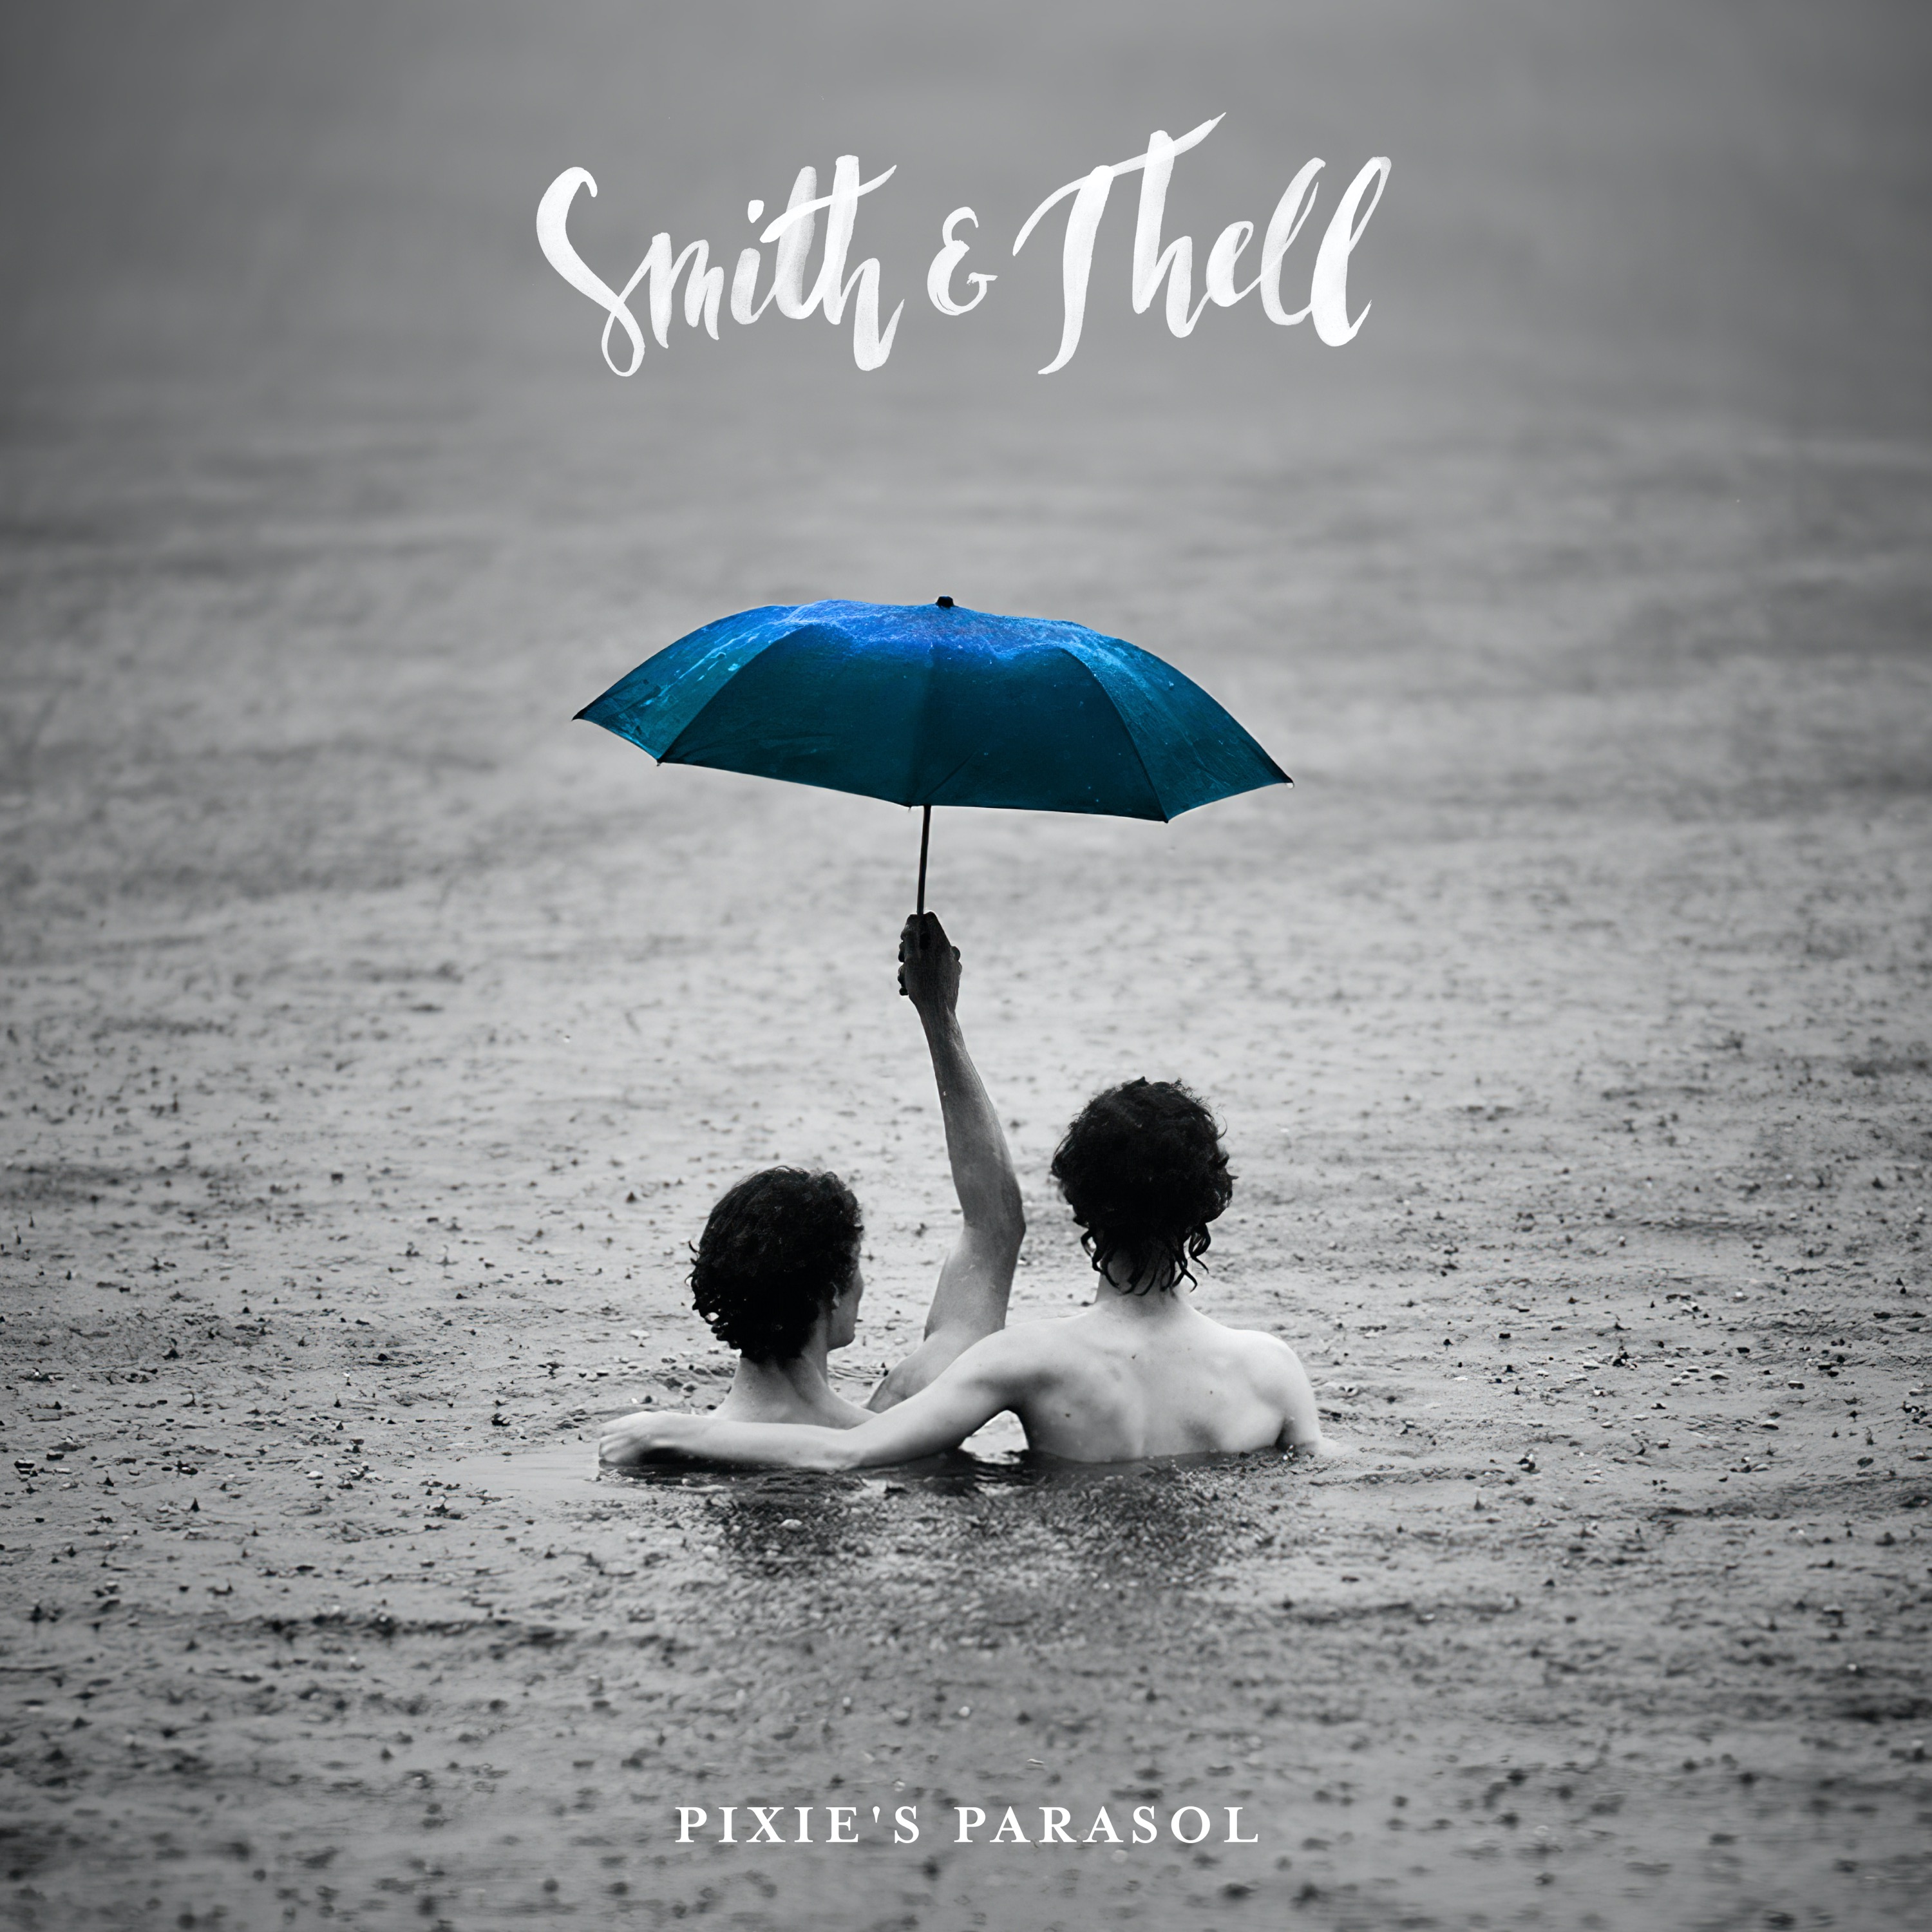 Smith & Thell - Pixie's Parasol - CD